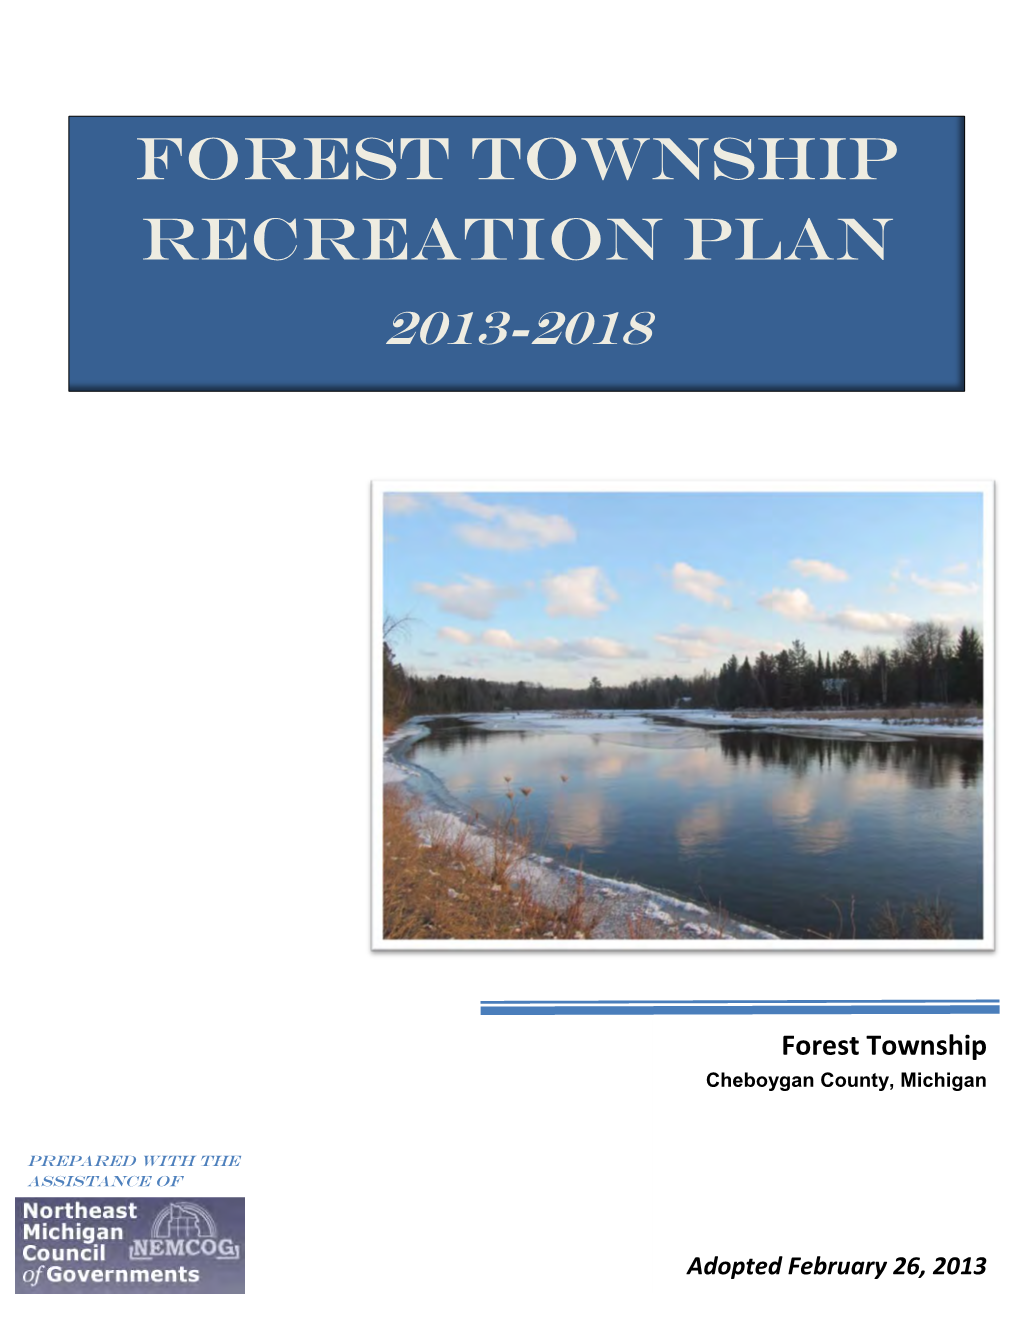 Forest Township Recreation Plan 2013-2018